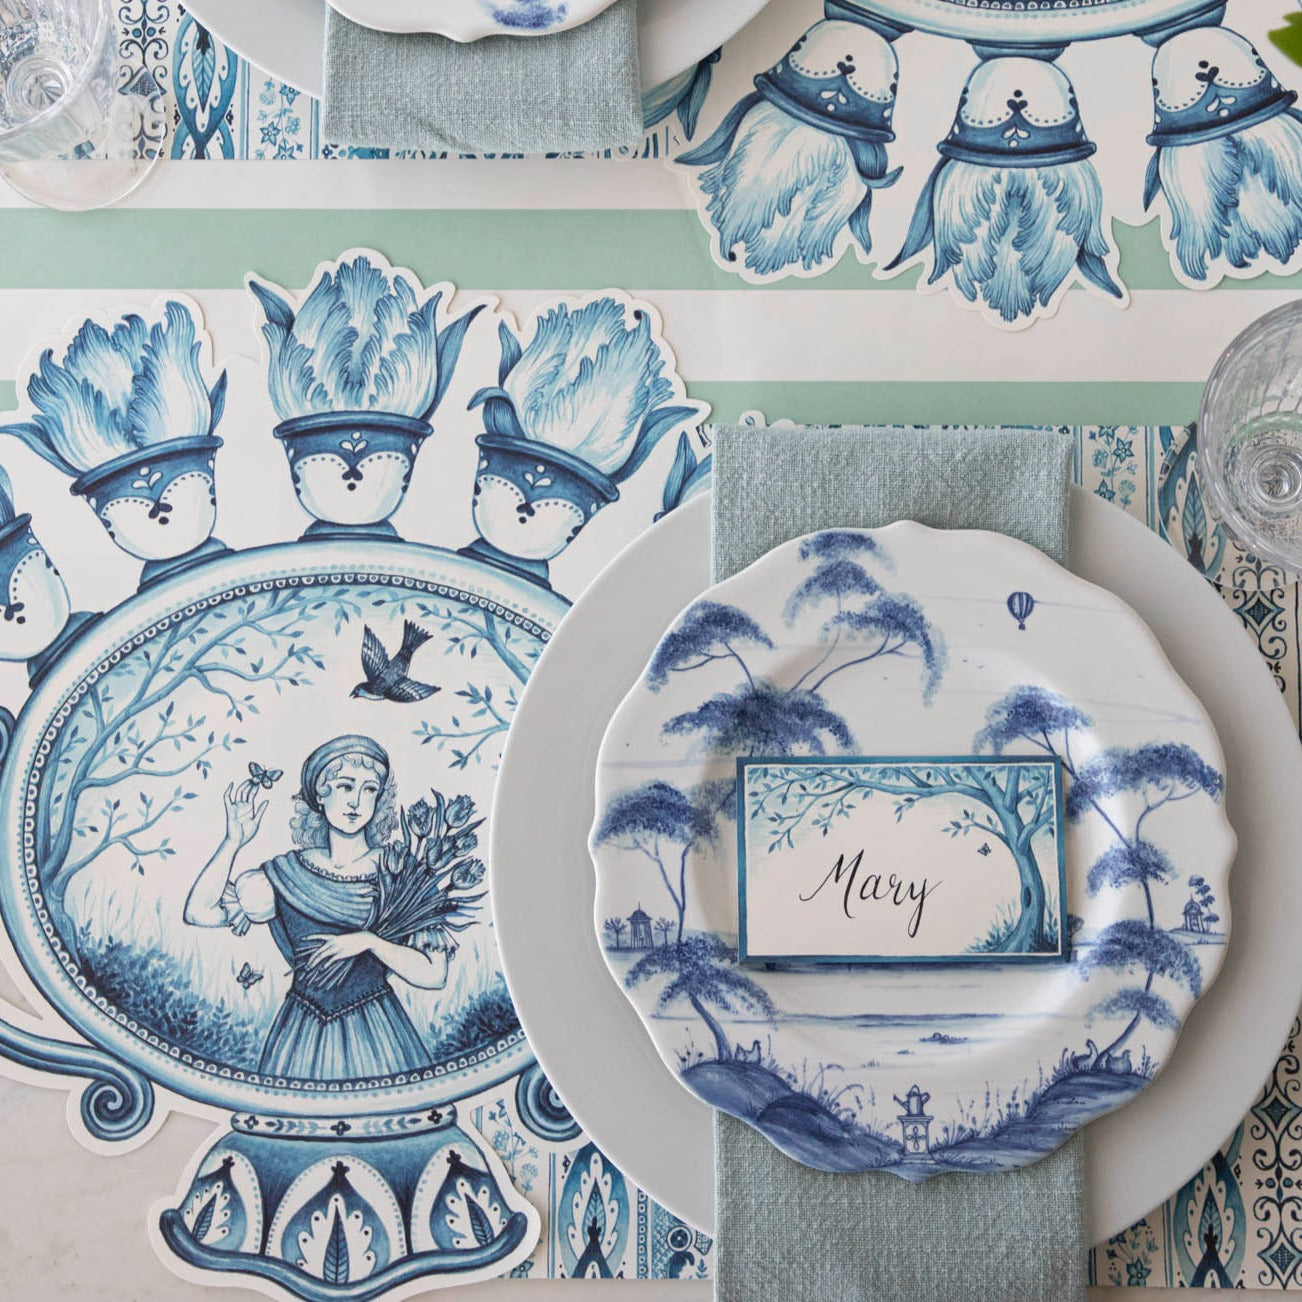 The Die-cut Indigo Meadow Placemat under an elegant table setting, from above.